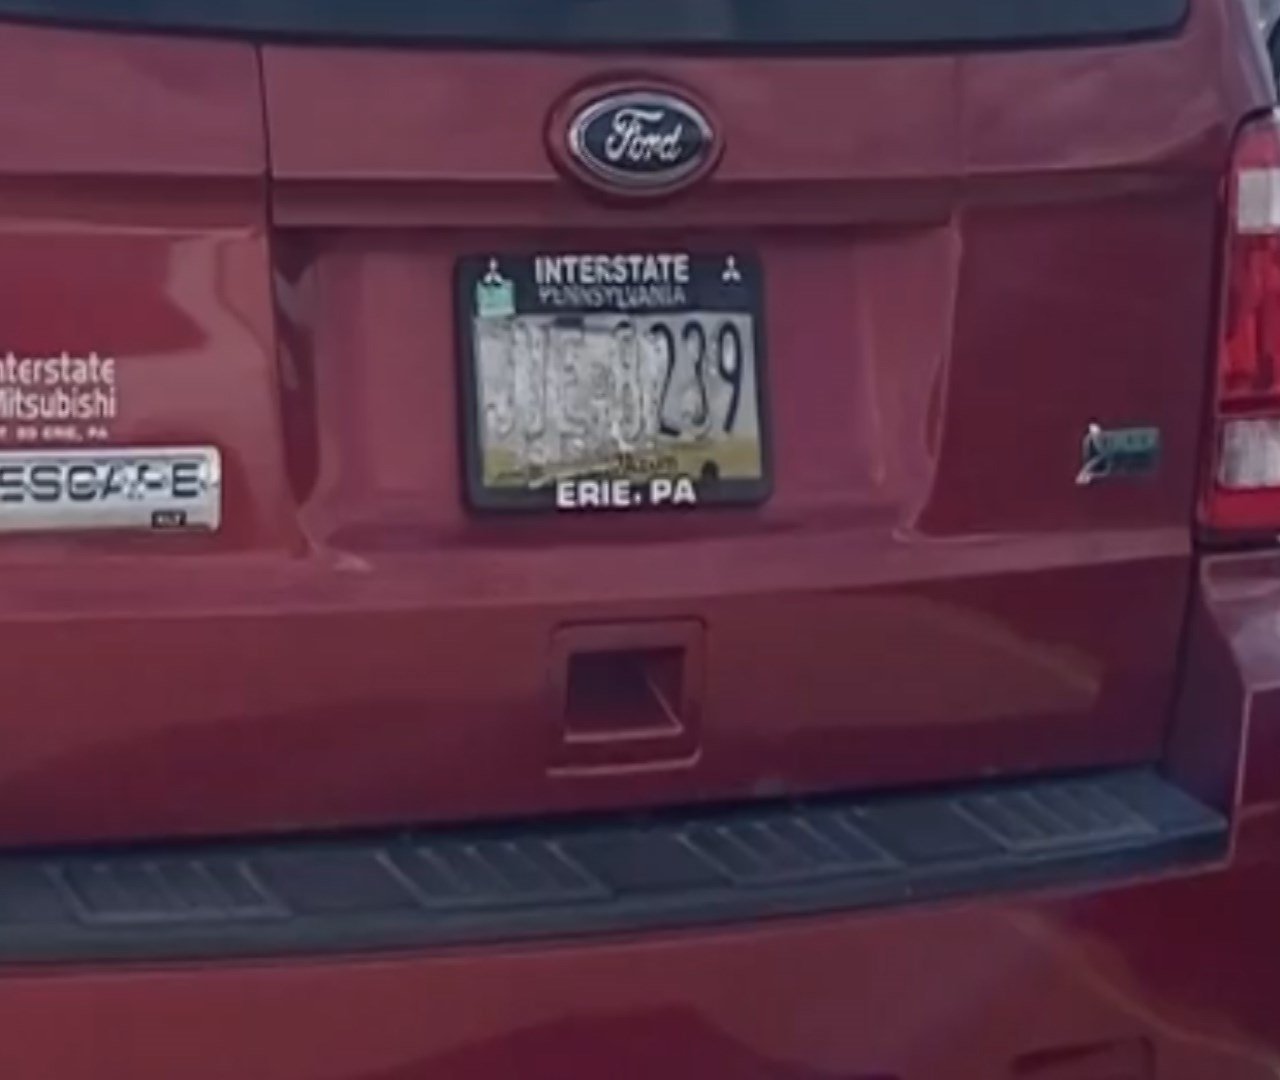 State Sen. Hutchinson to Help Residents Replace Worn Out License Plates